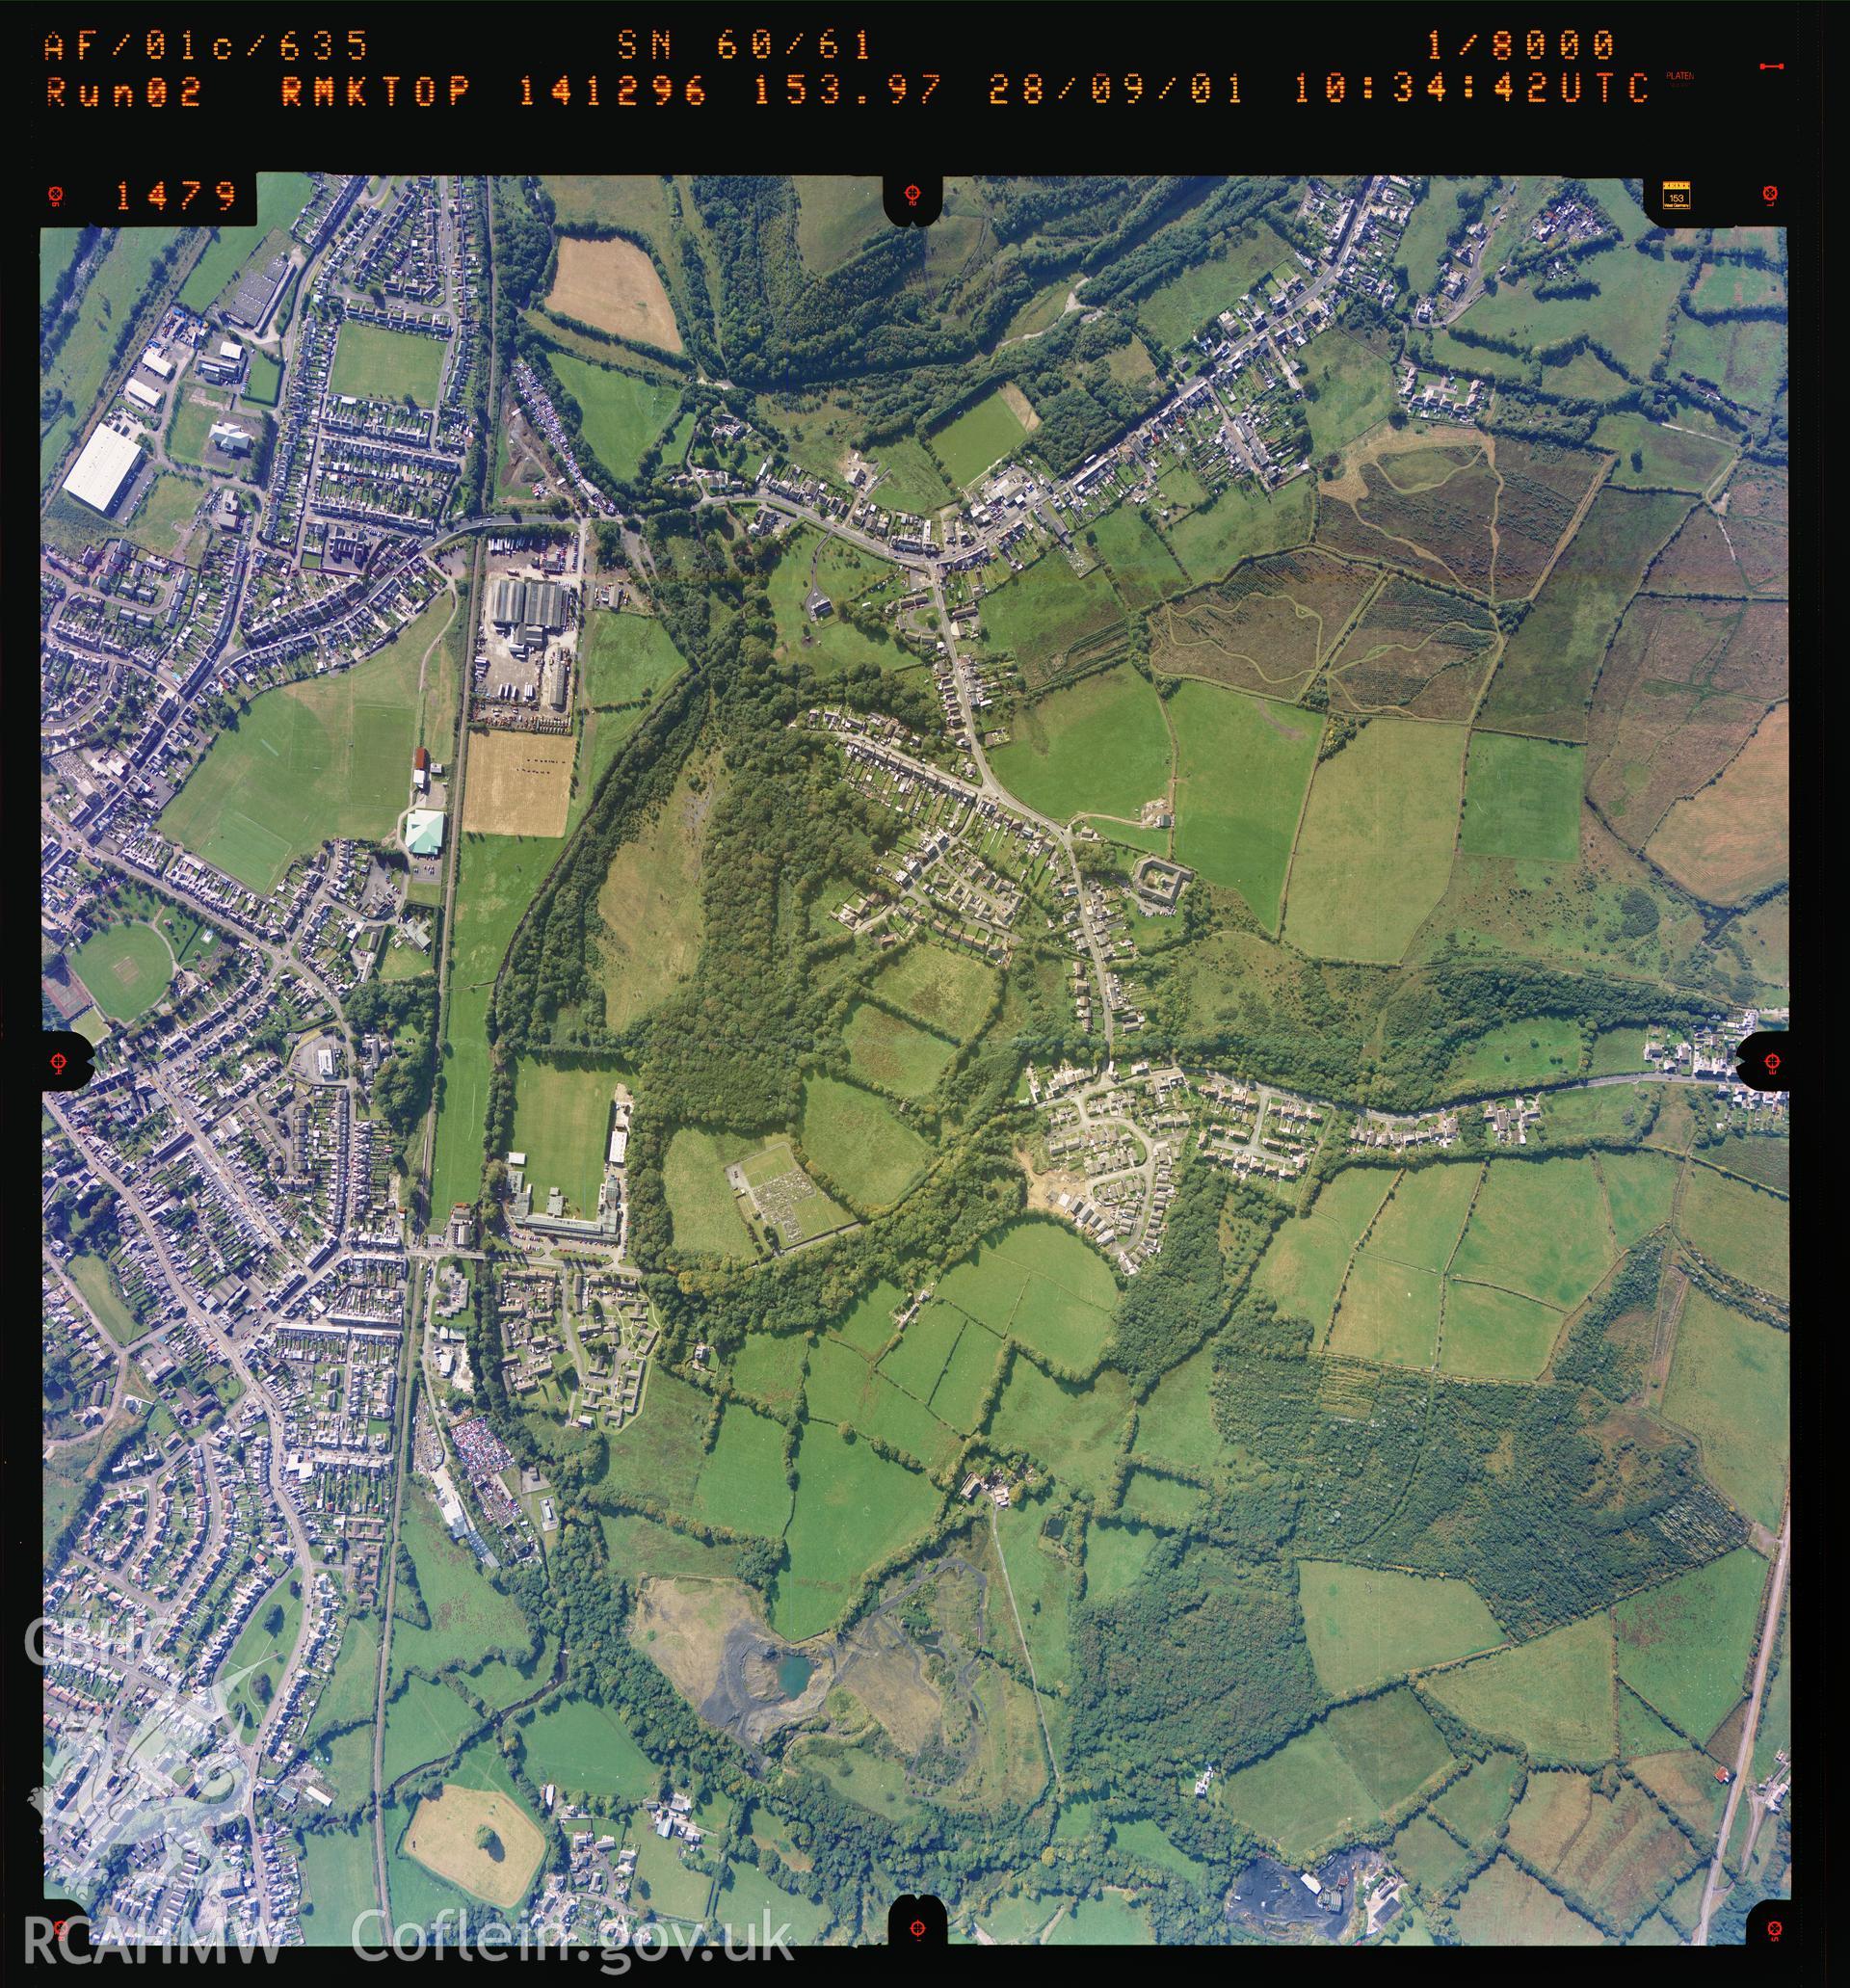 Digitized copy of an aerial photograph showing the Ammanford area, taken by Ordnance Survey, 2001.